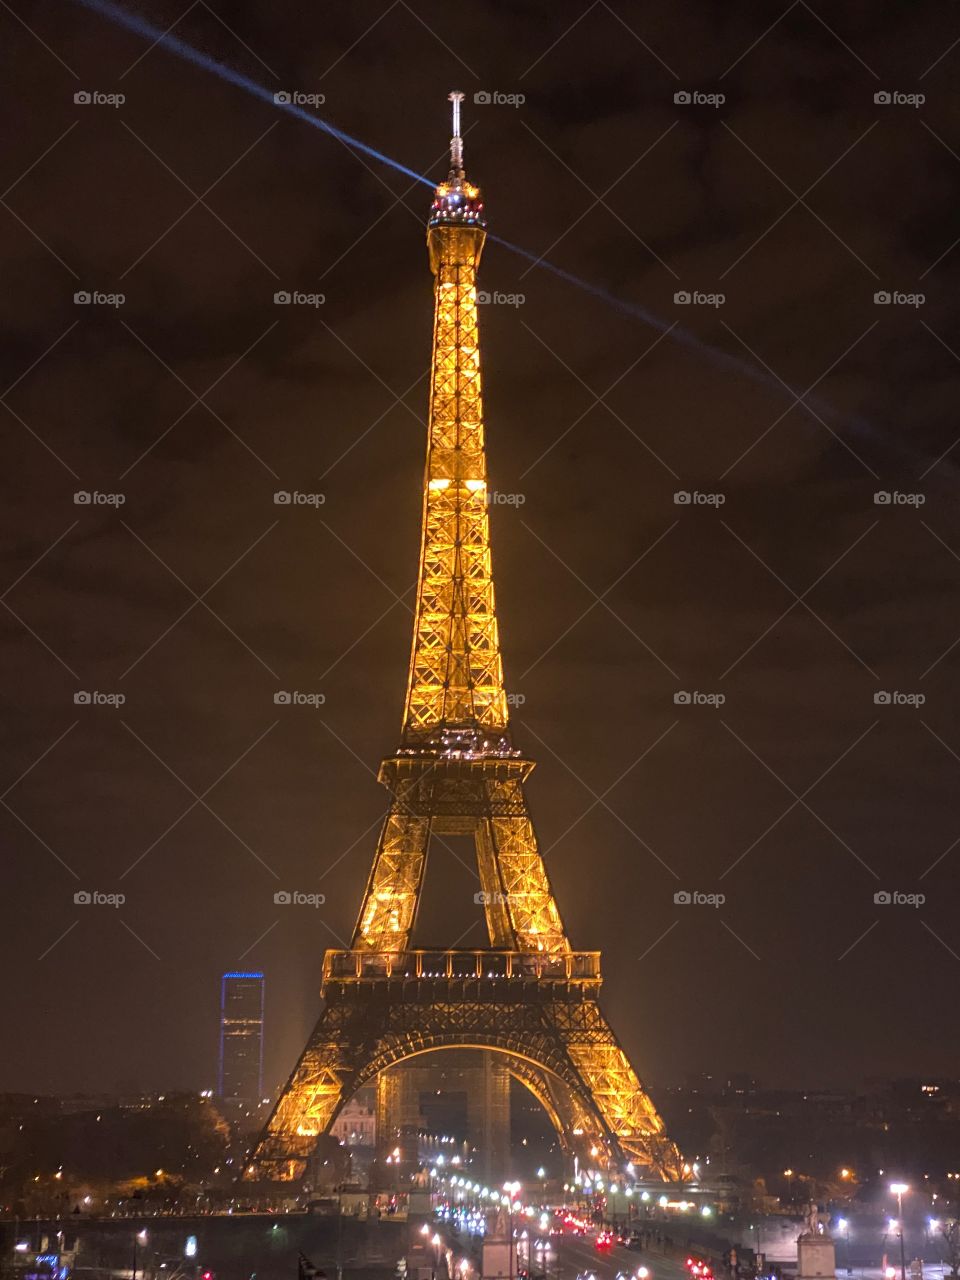 The Eiffel Tower in the Centre of the City of Paris